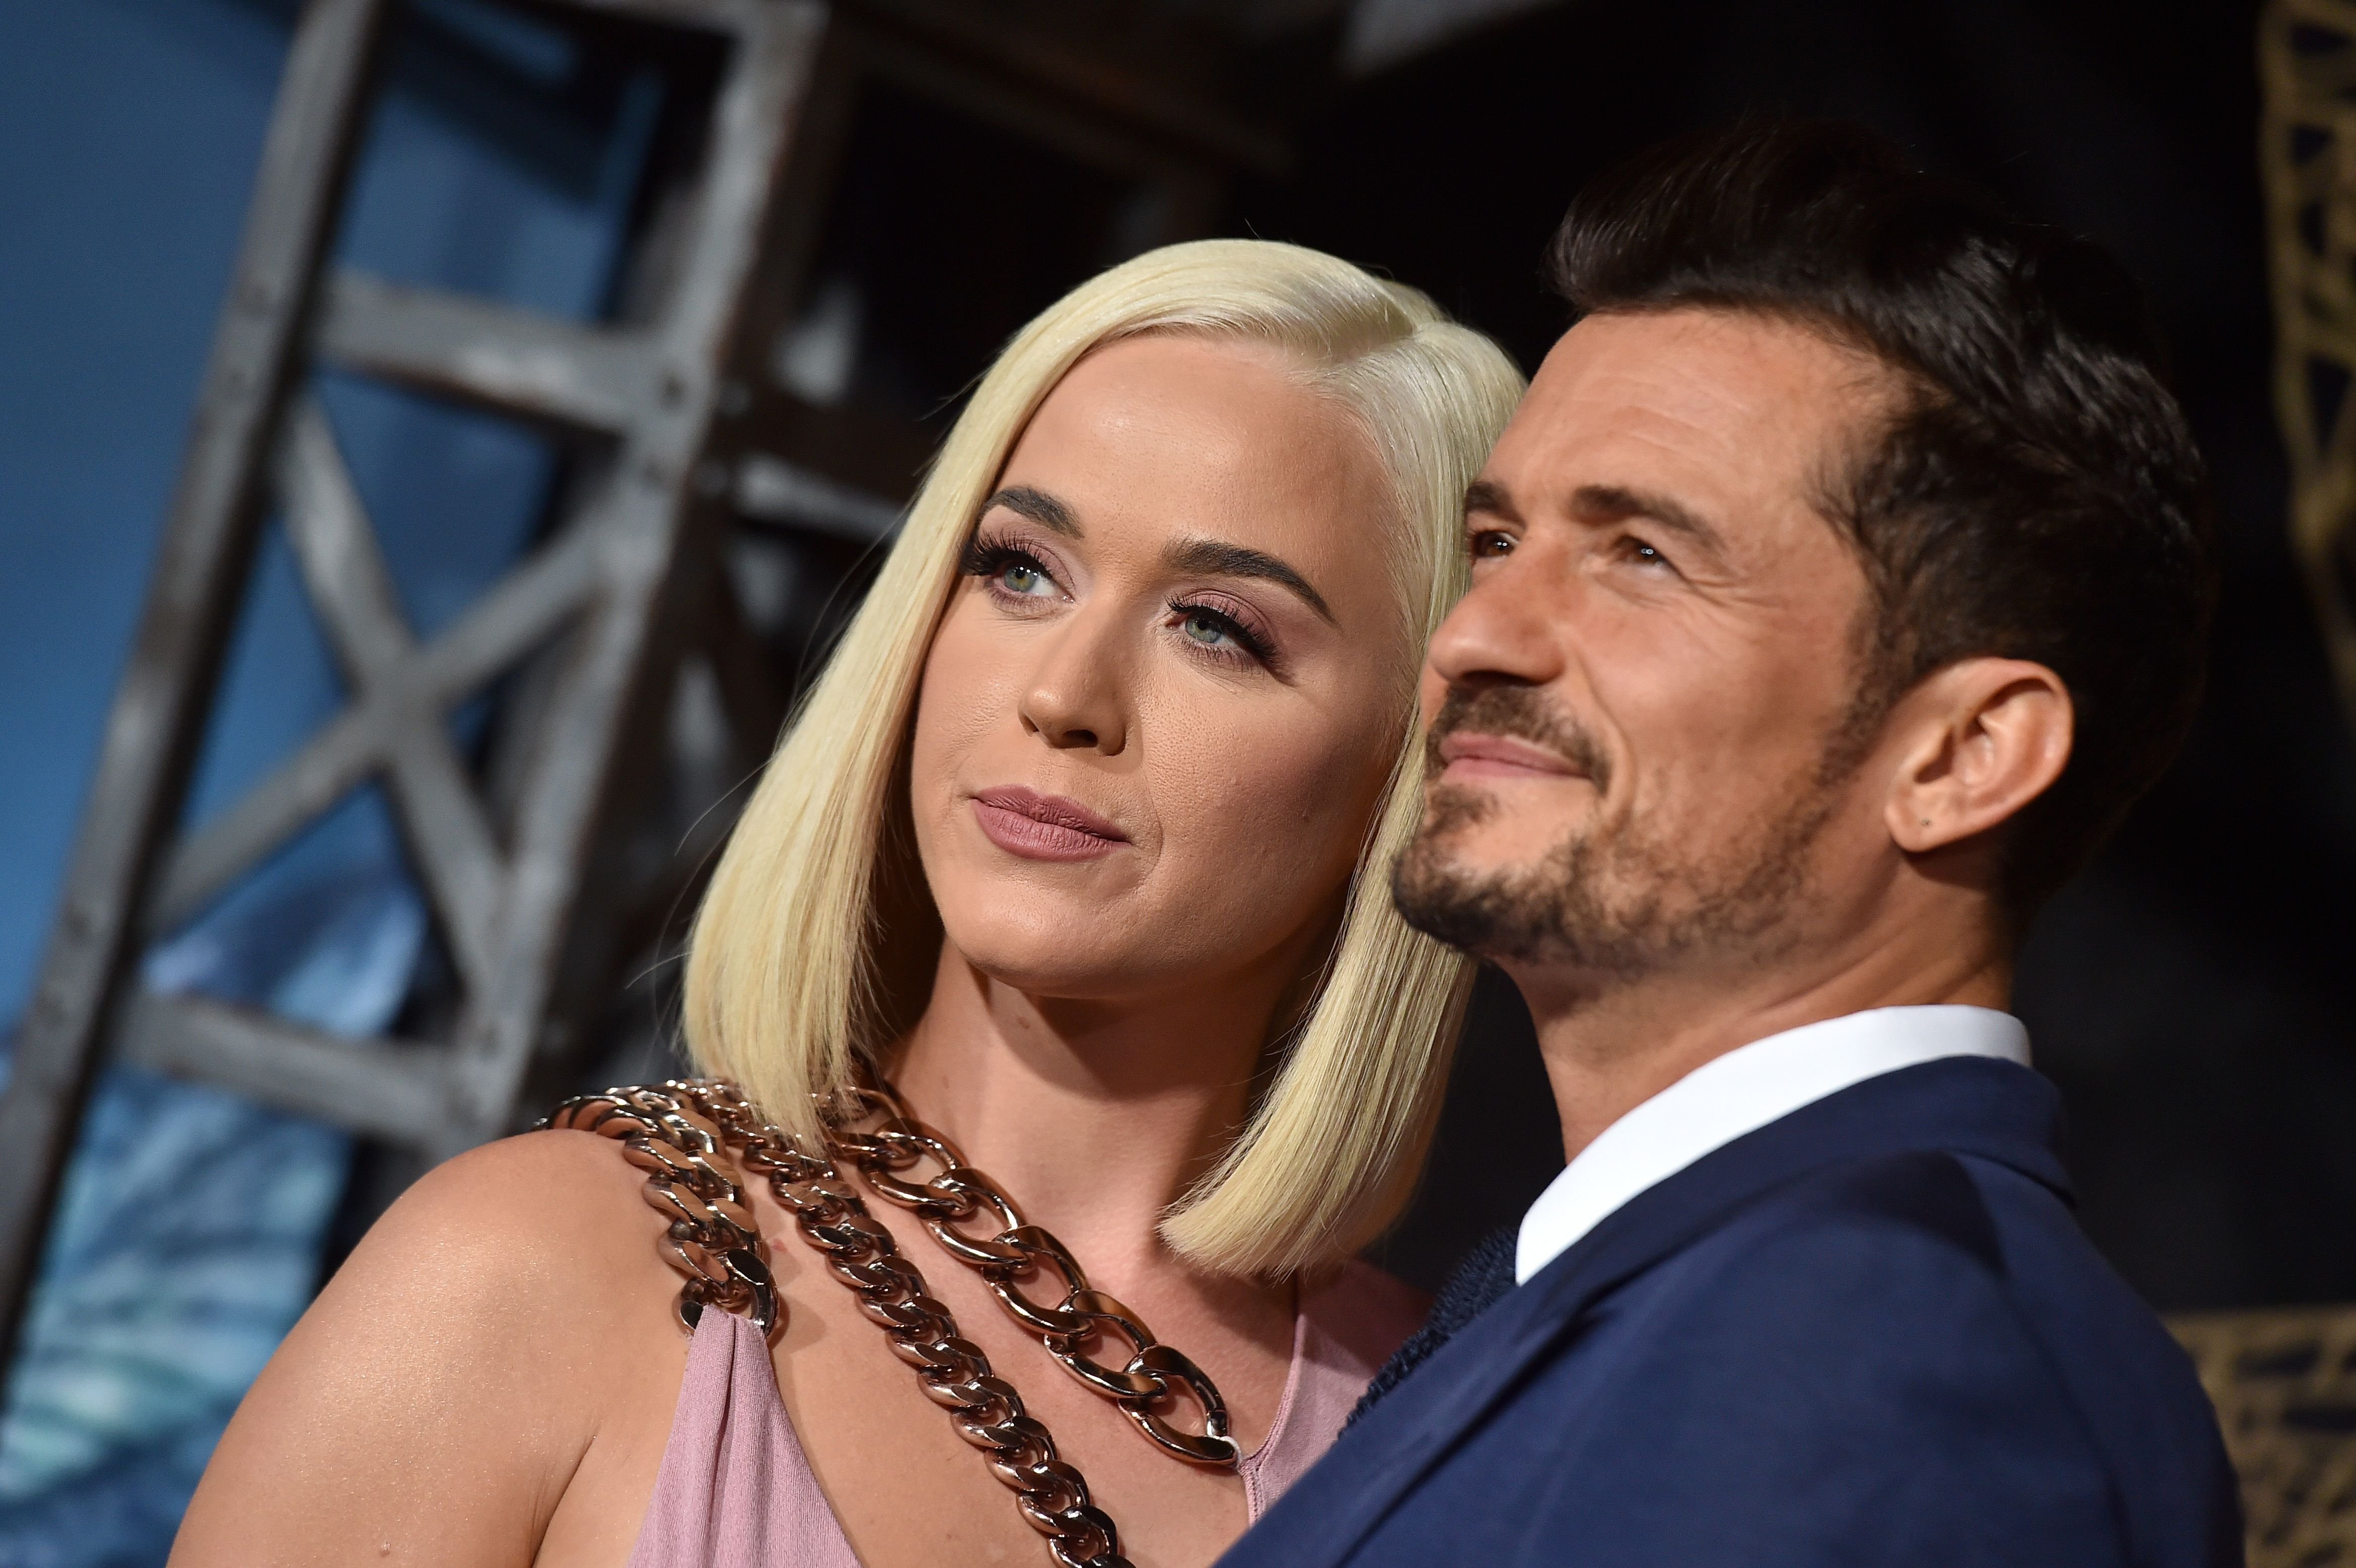 Katy Perry and Orlando Bloom at the LA premiere of Amazon's "Carnival Row" at TCL Chinese Theatre on August 21, 2019 in Hollywood, California | Photo: Getty Images